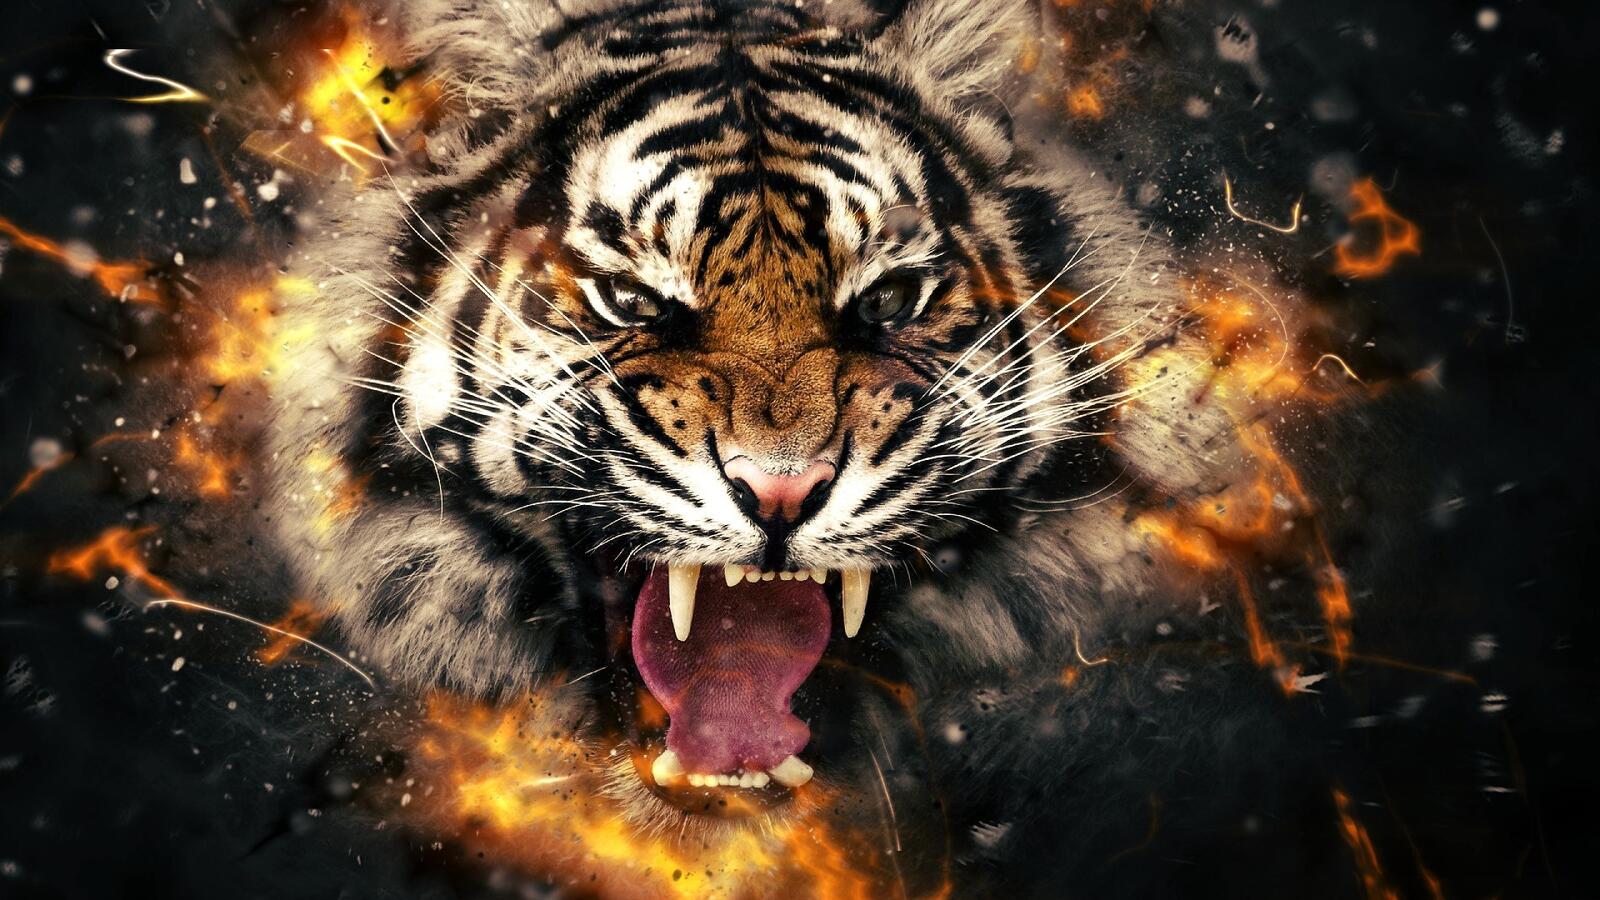 Free photo Rendering of a picture of a tiger on fire